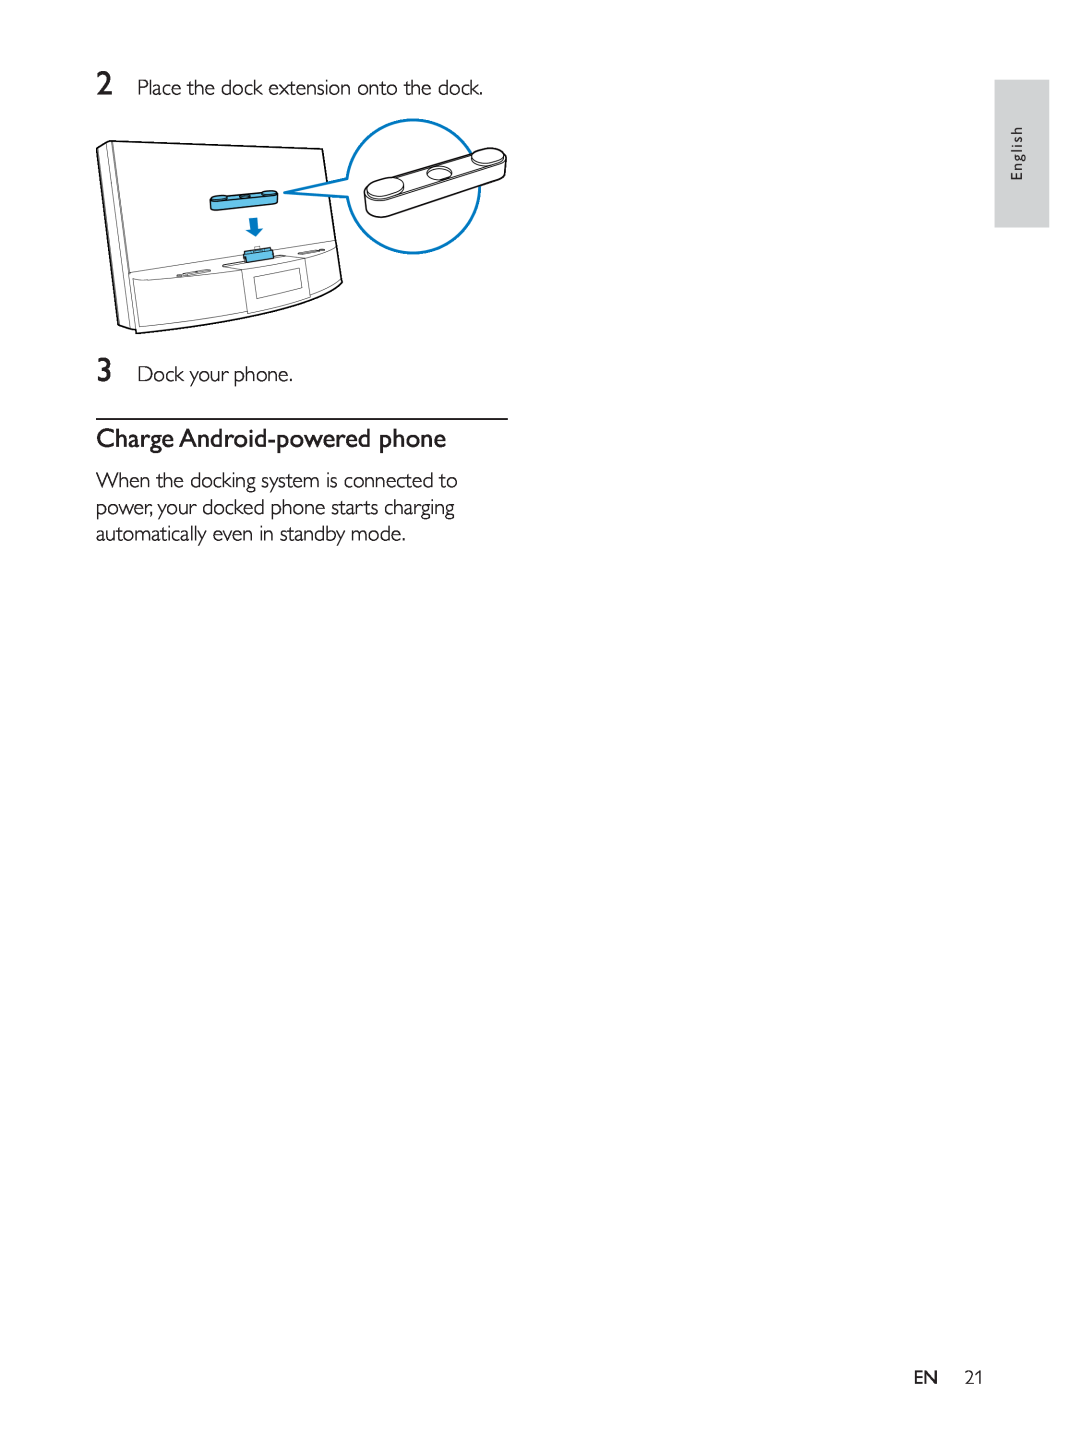 Philips AS140 user manual Charge Android-poweredphone, Place the dock extension onto the dock, Dock your phone 